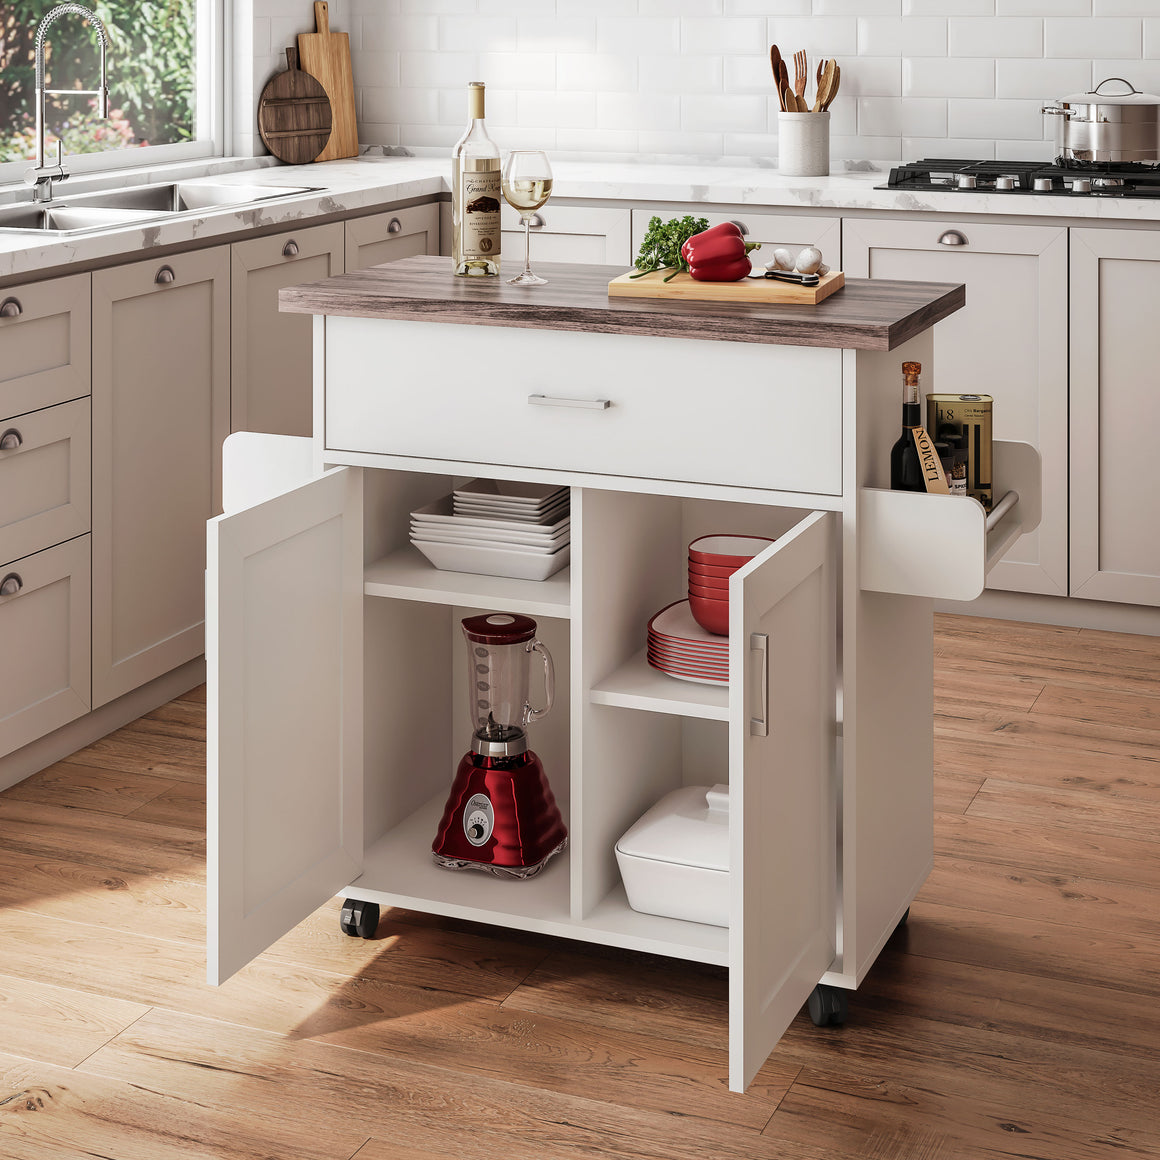 Deluxe Mobile Kitchen Island Cart with Waterproof Top, Storage Cabinets with Adjustable Shelves, and Towel & Spice Rack